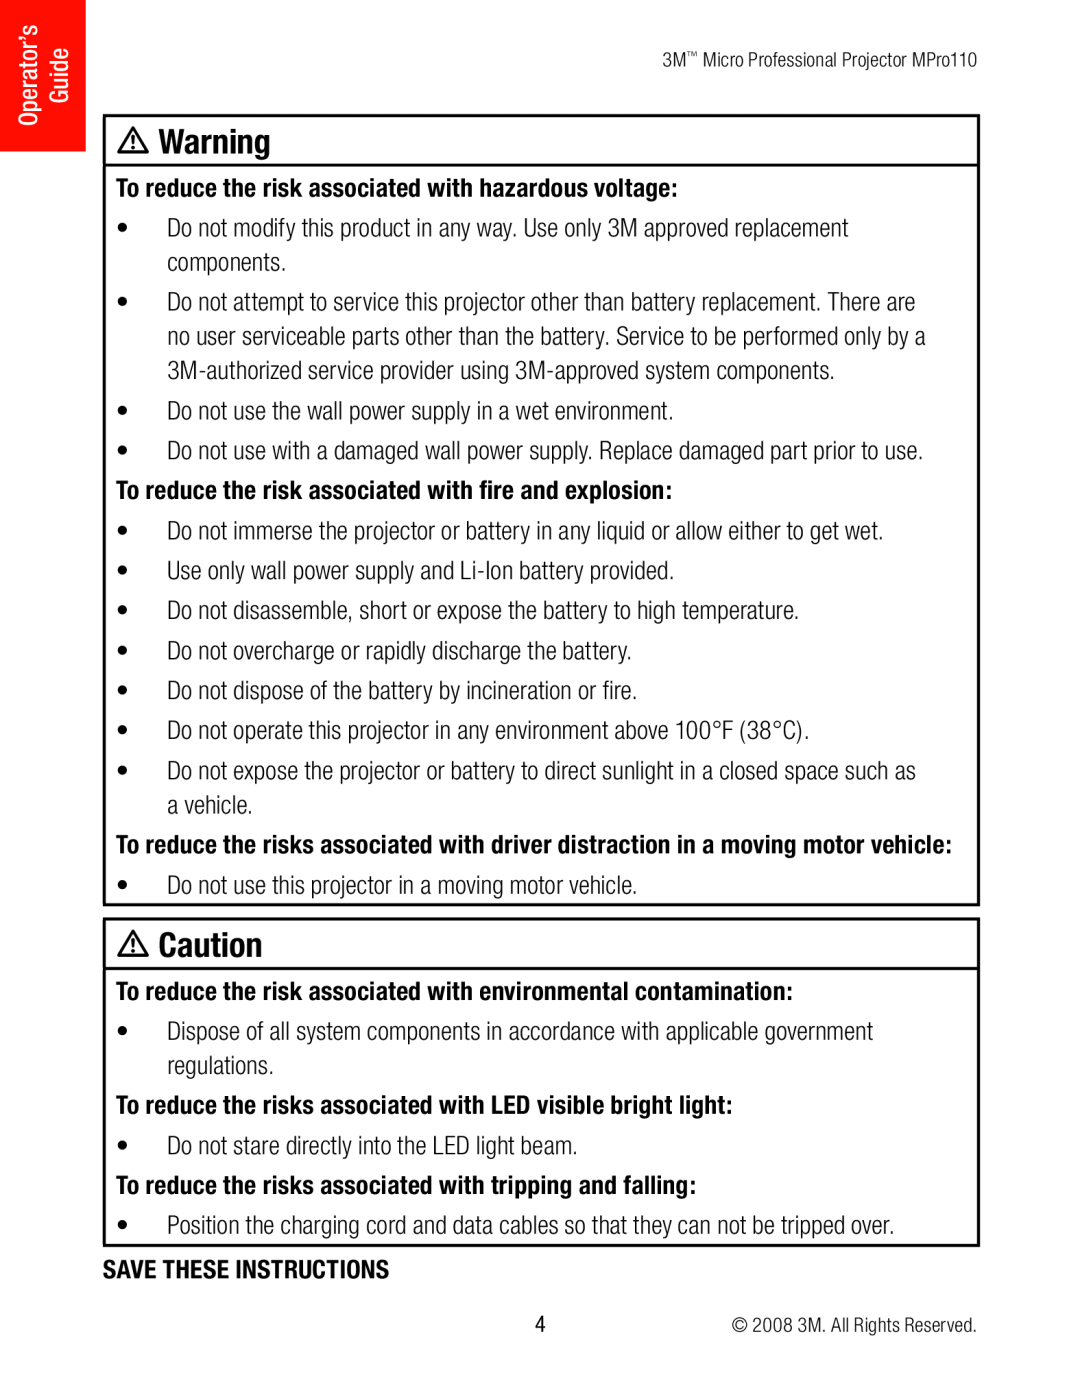 3M MPro110 manual m Warning, m Caution, To reduce the risk associated with hazardous voltage, Save These Instructions 